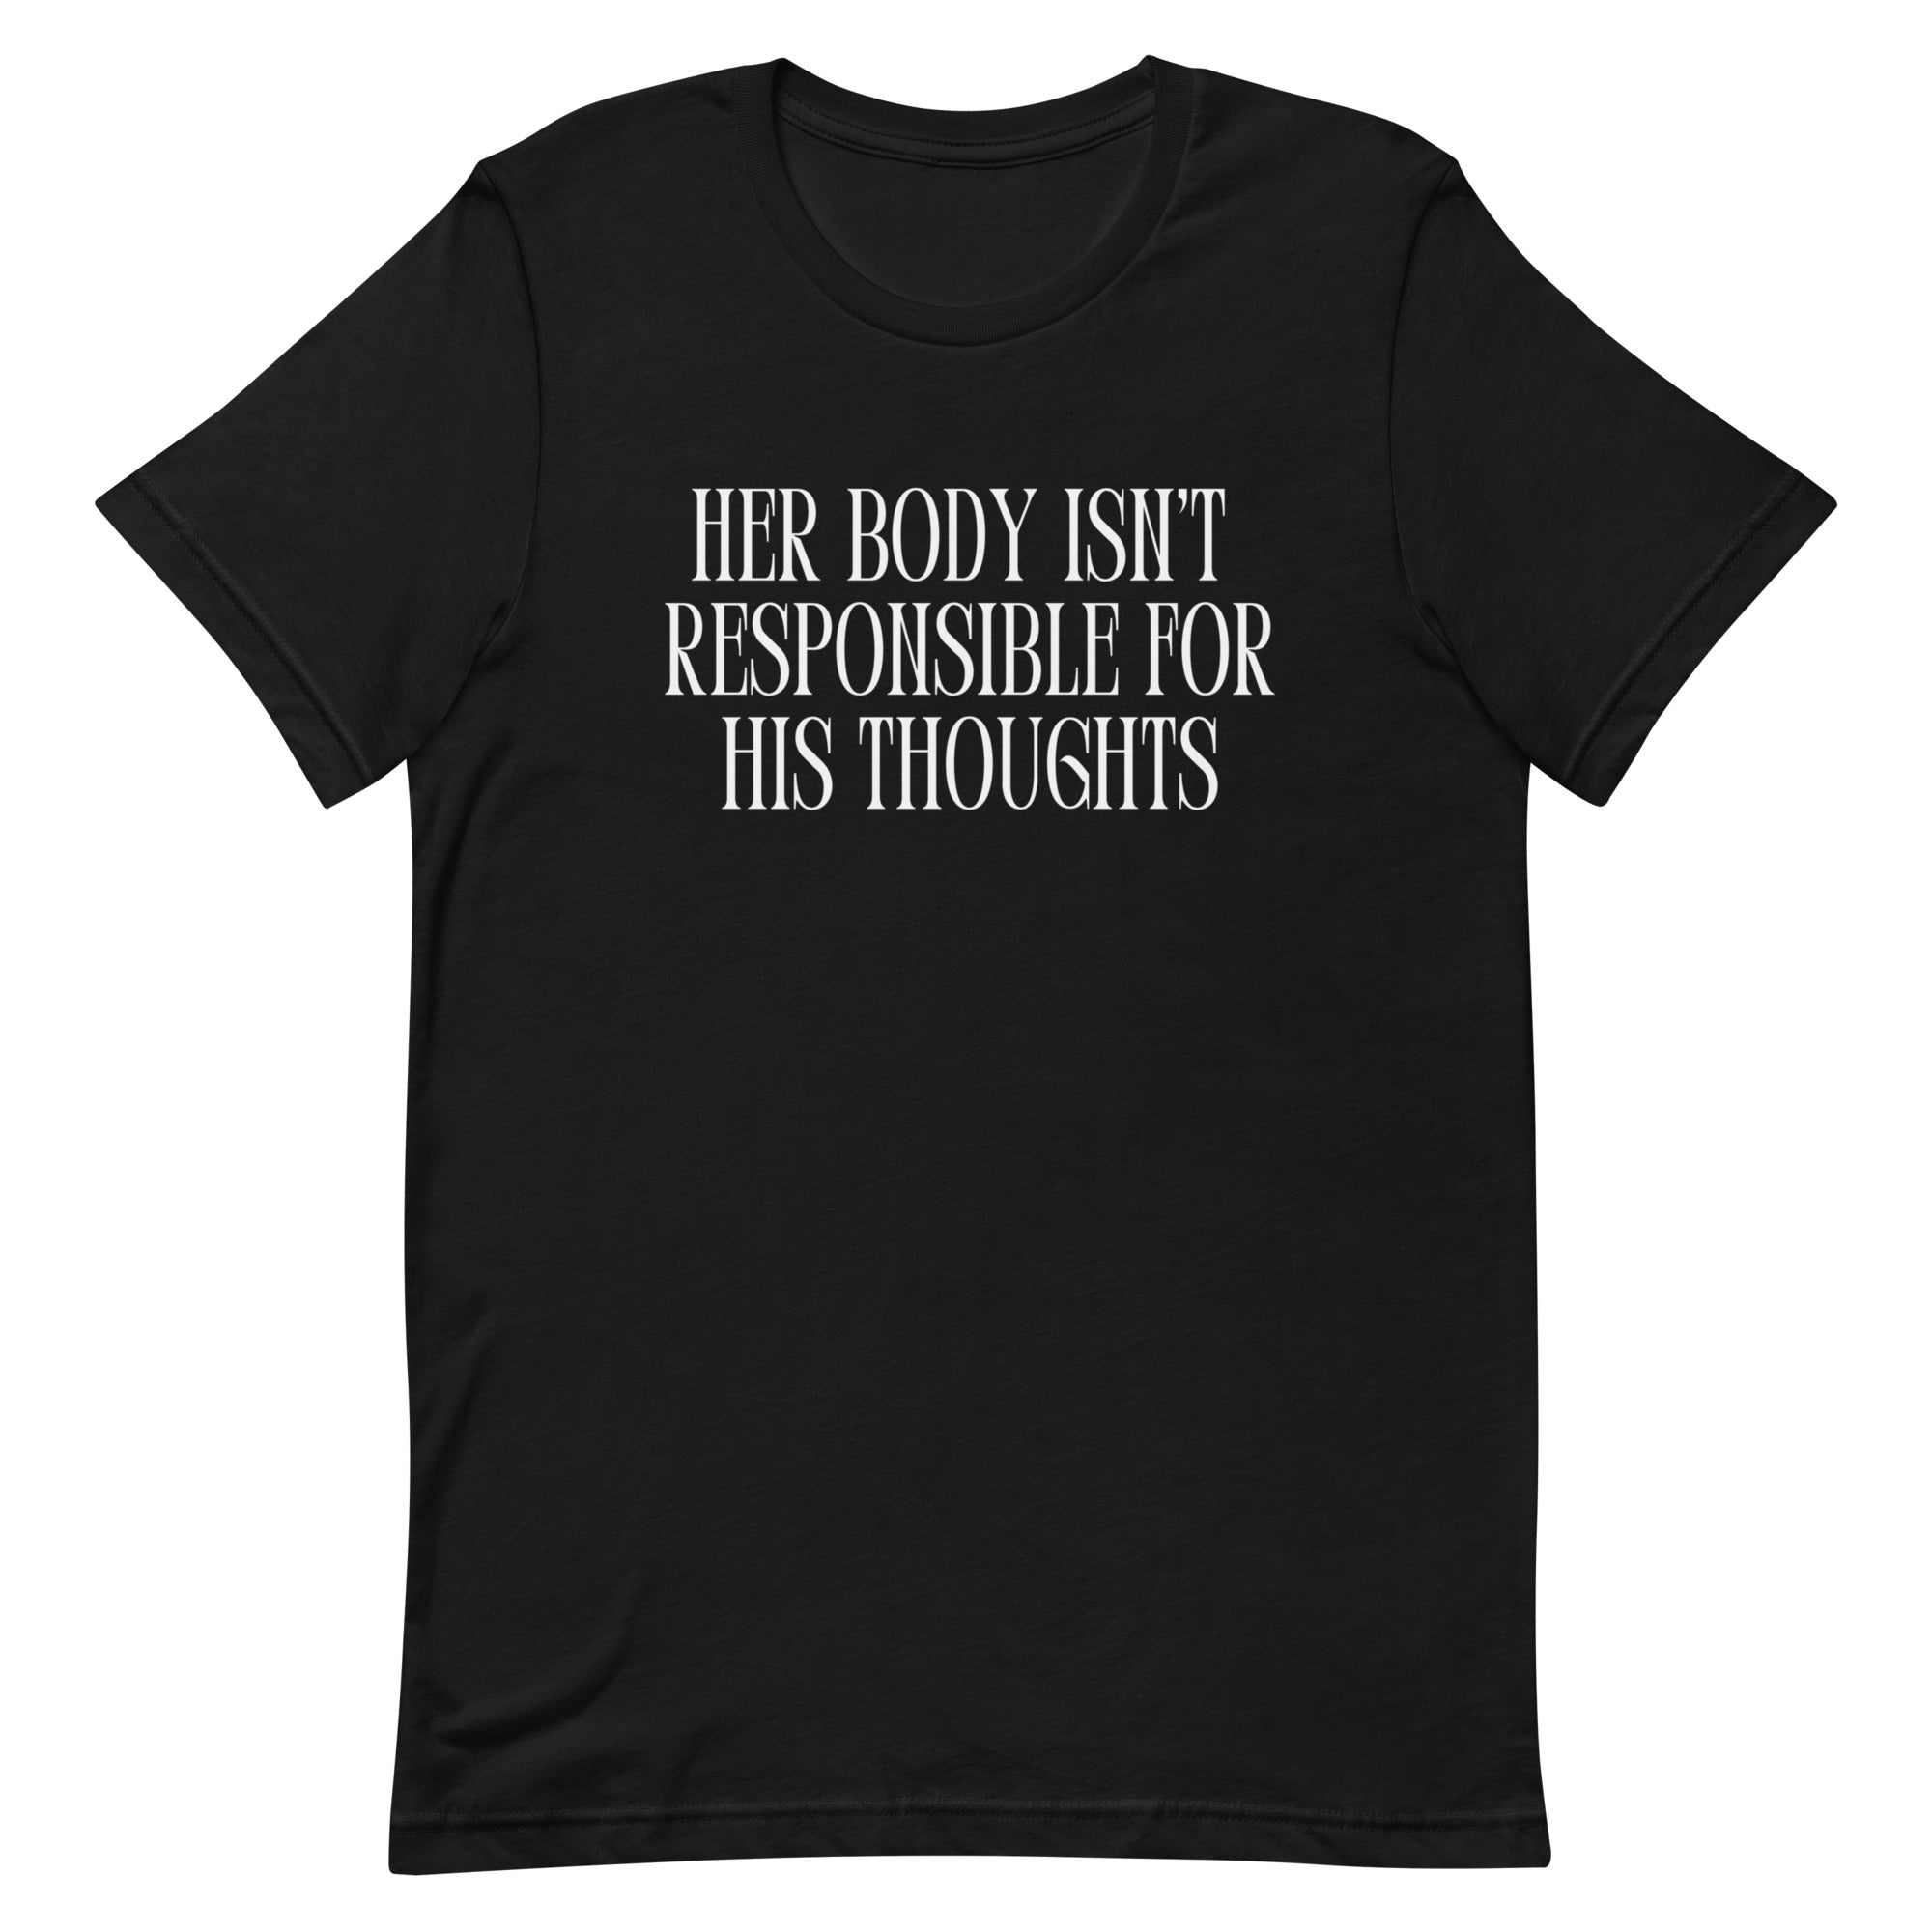 Her Body Isn’t Responsible For His Thoughts Unisex Feminist t-shirt - Shop Women’s Rights T-shirts - Feminist Trash Store - Black